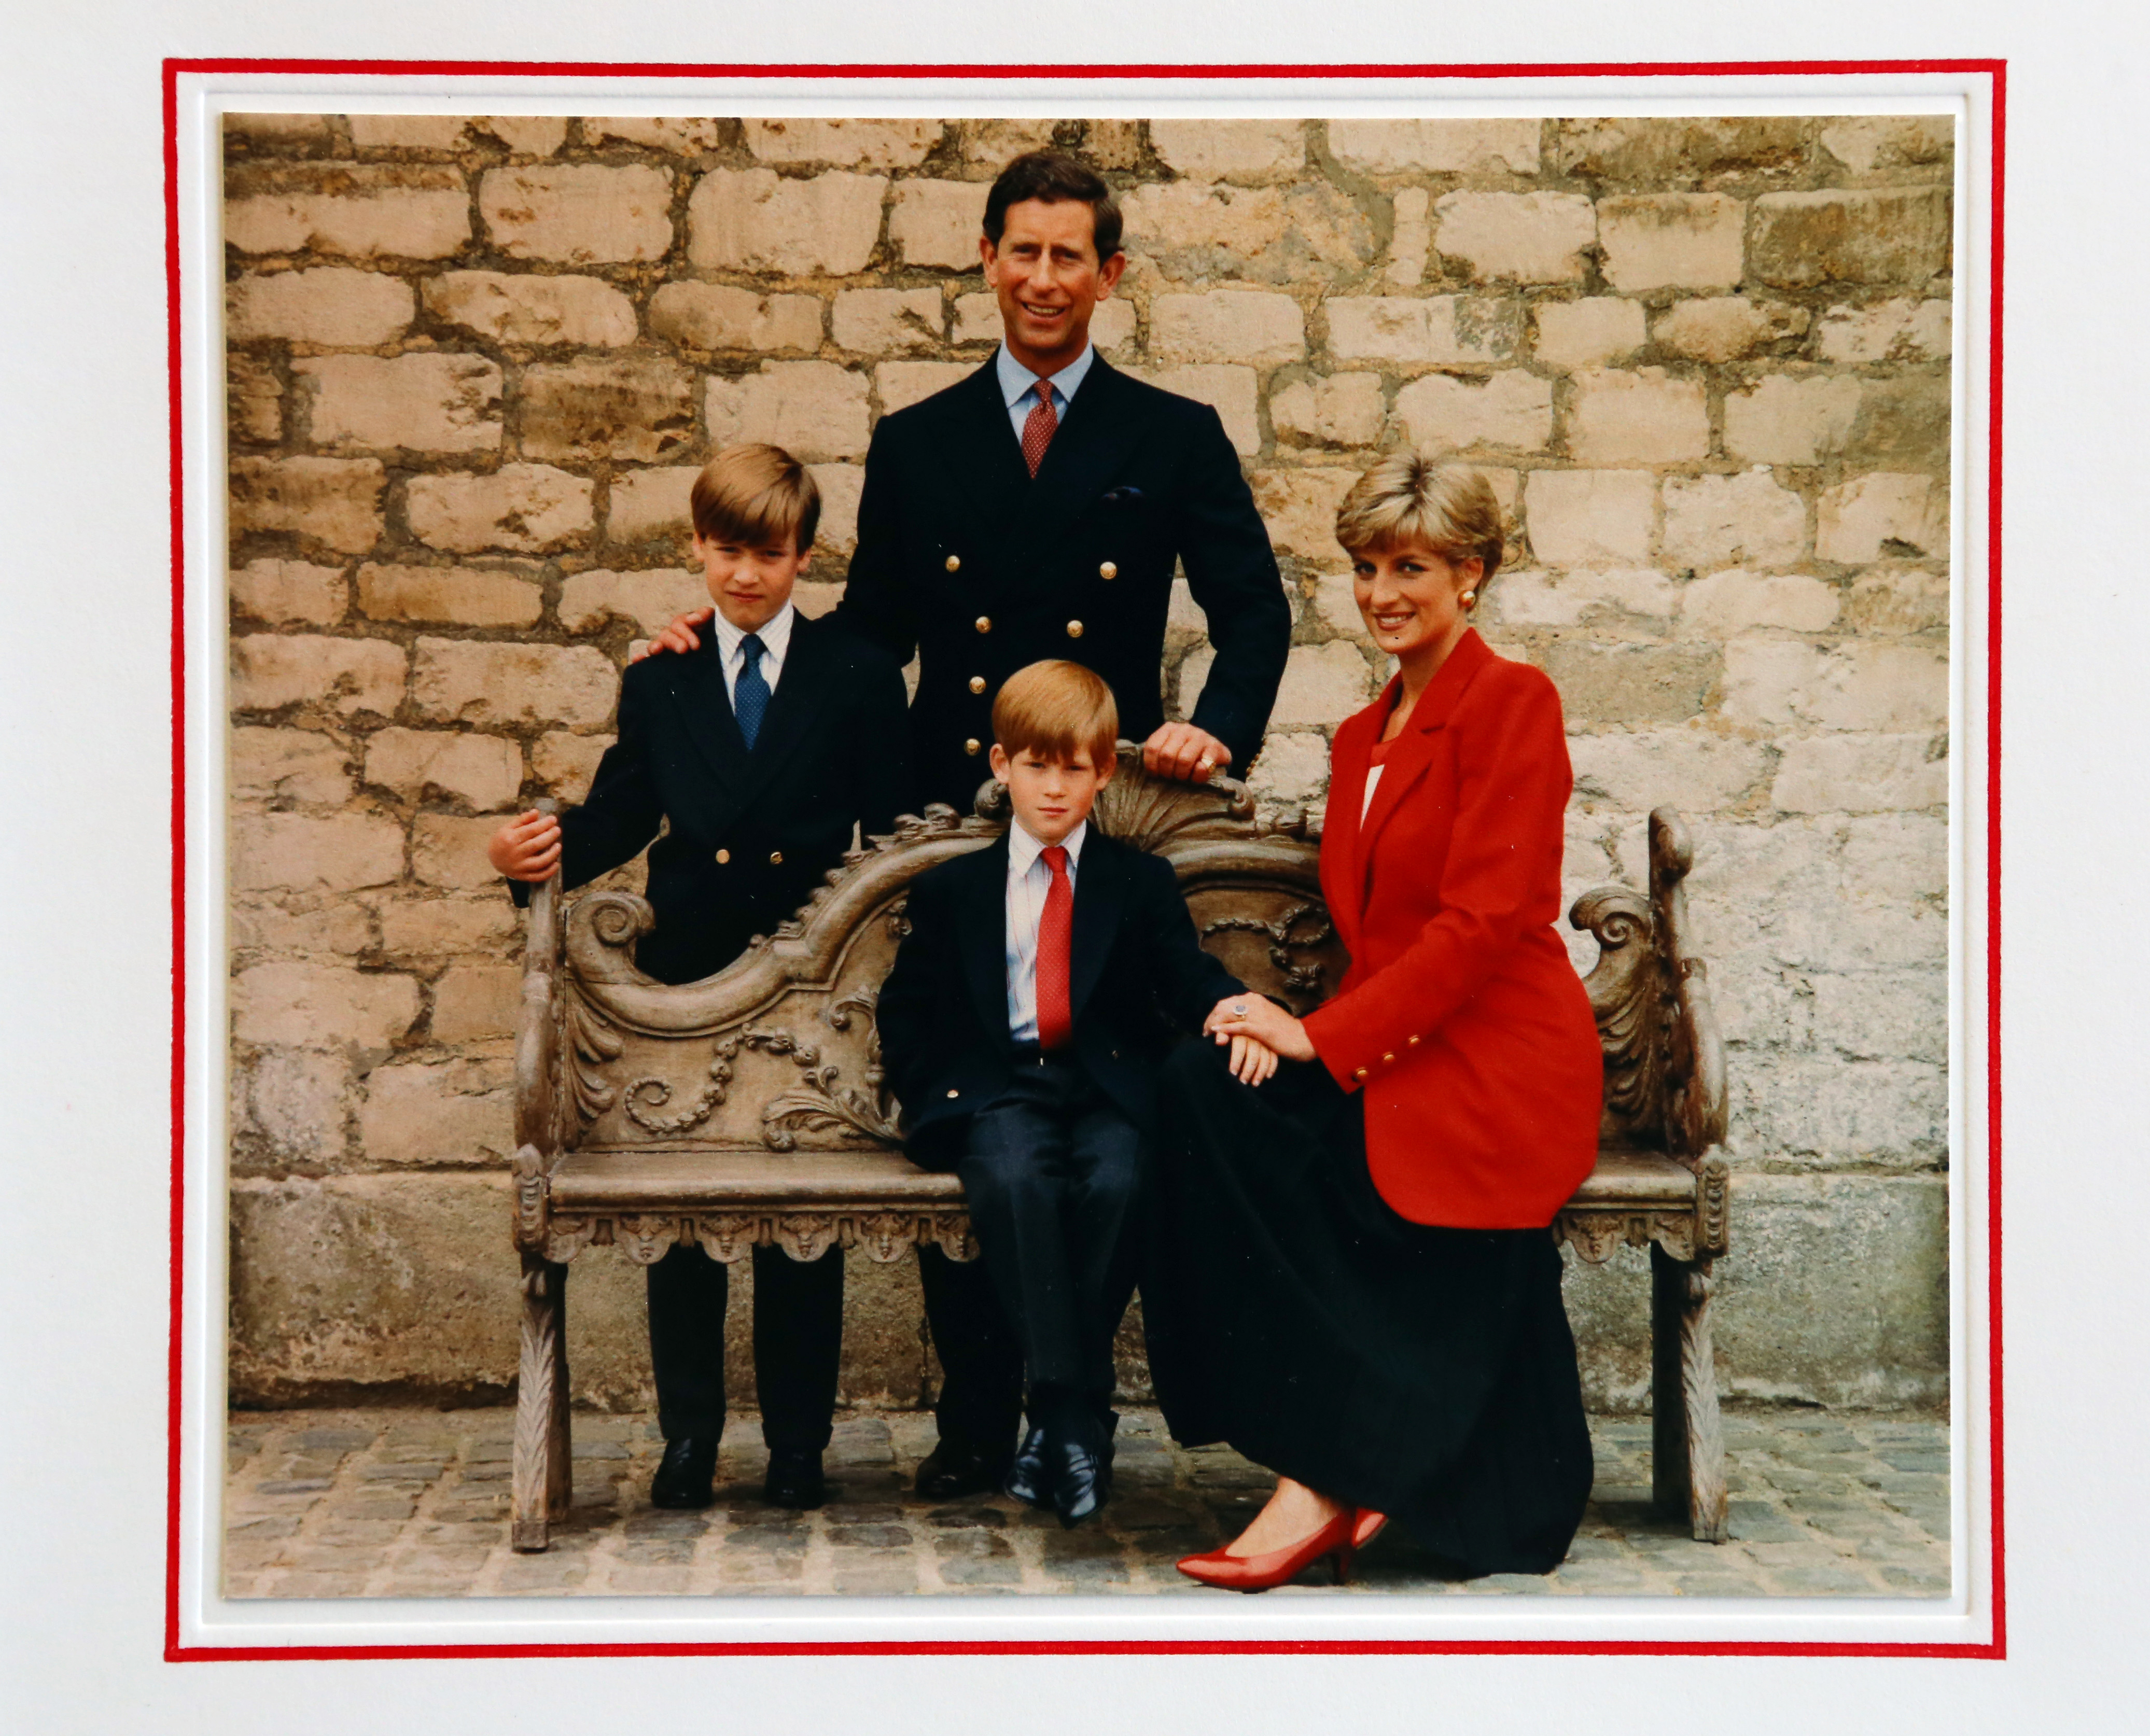 1991 Royal Christmas Card. Prince Charles and Princess Diana with their children William and Harry.